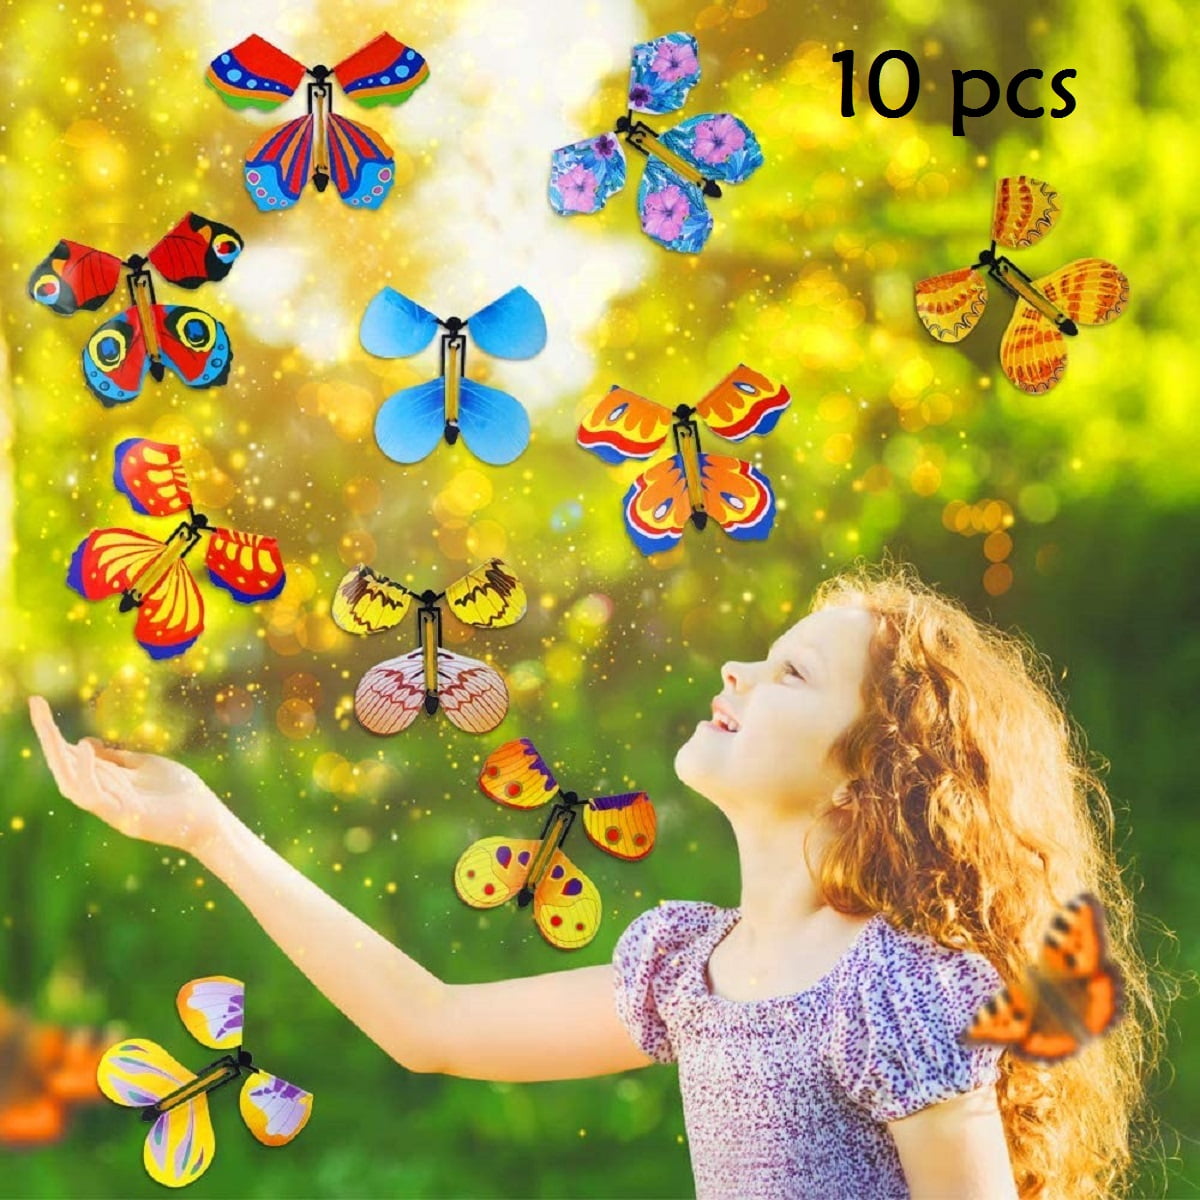 Flying butterfly surprise greeting card book magic toy fly wind up magic propsRS 